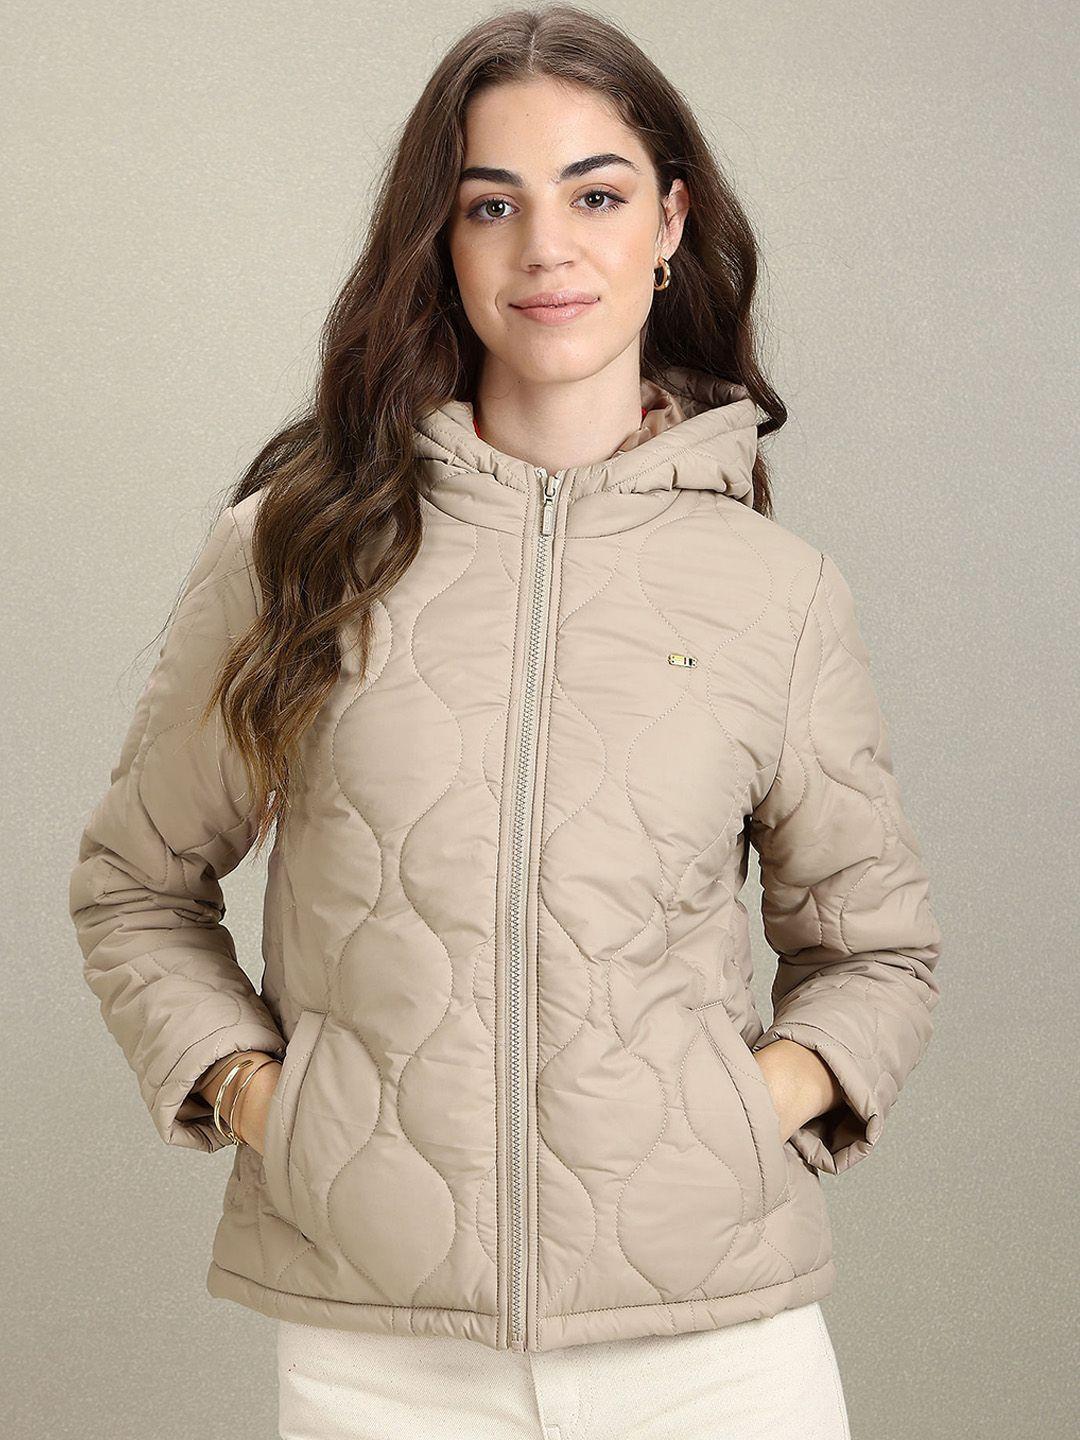 u.s. polo assn. women hooded quilted jacket